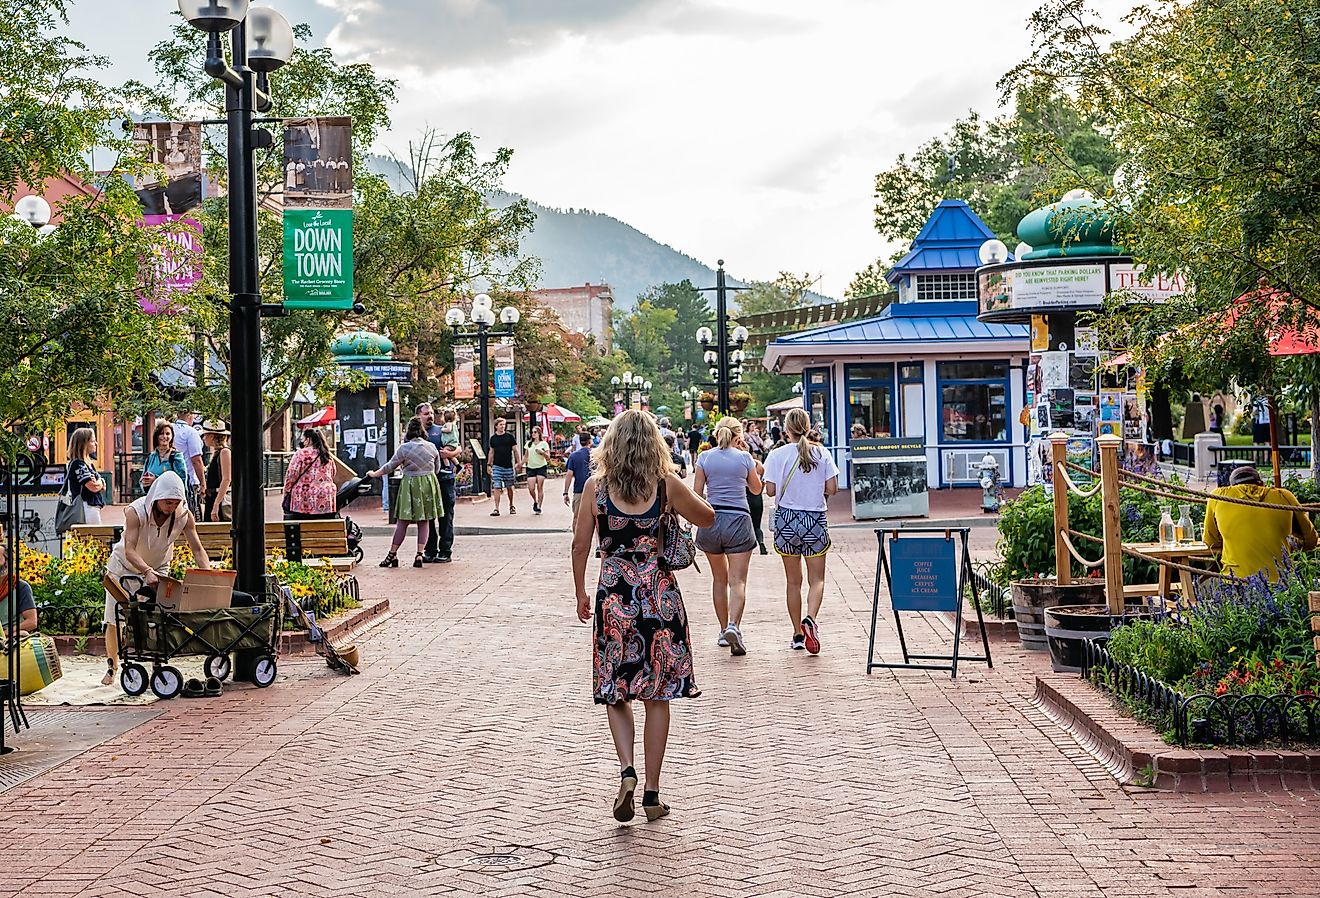 People explore the famous Pearl Street Mall, downtown, on a beautiful evening in Boulder, Colorado. Image credit Page Light Studios via Shutterstock